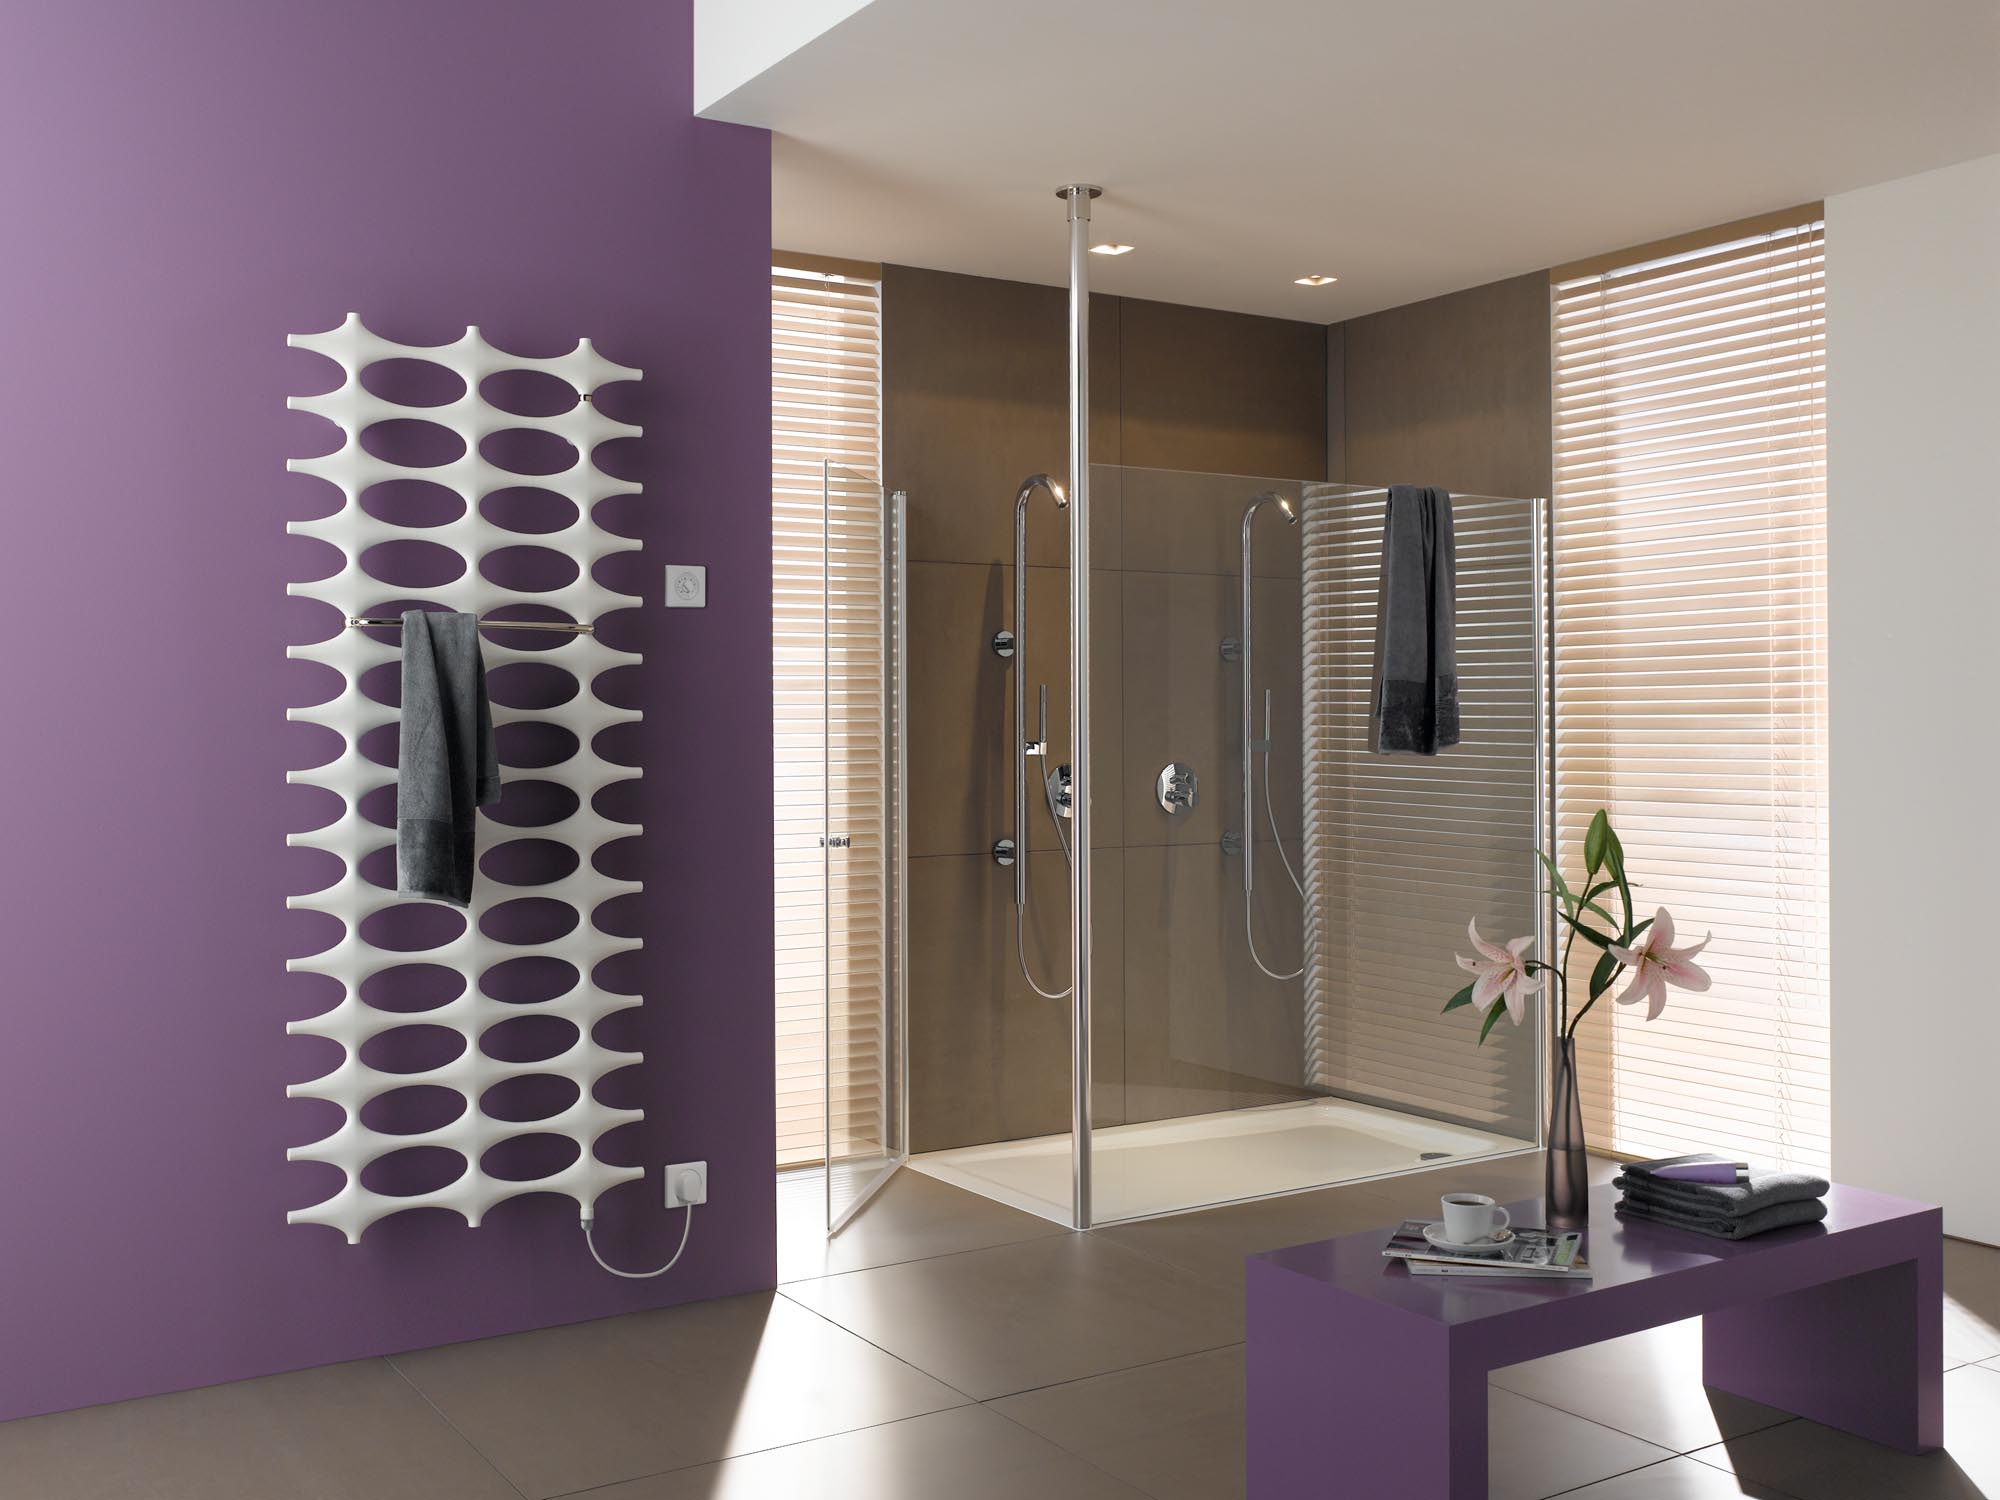 Kermi Ideos design and bathroom radiators also available in an electric version.